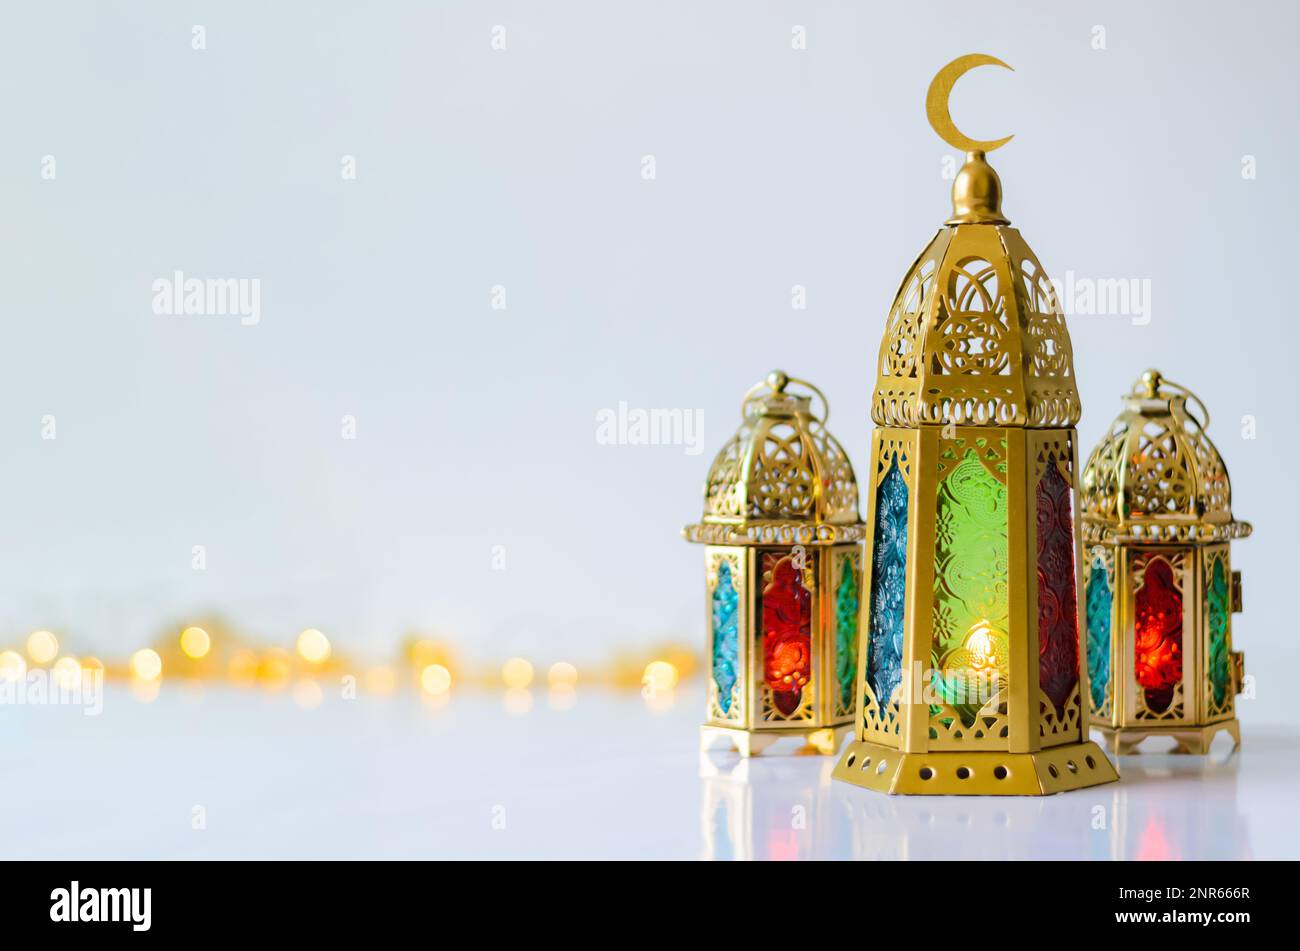 Golden lanterns put on white background with lights for the Muslim feast of the holy month of Ramadan Kareem. Stock Photo